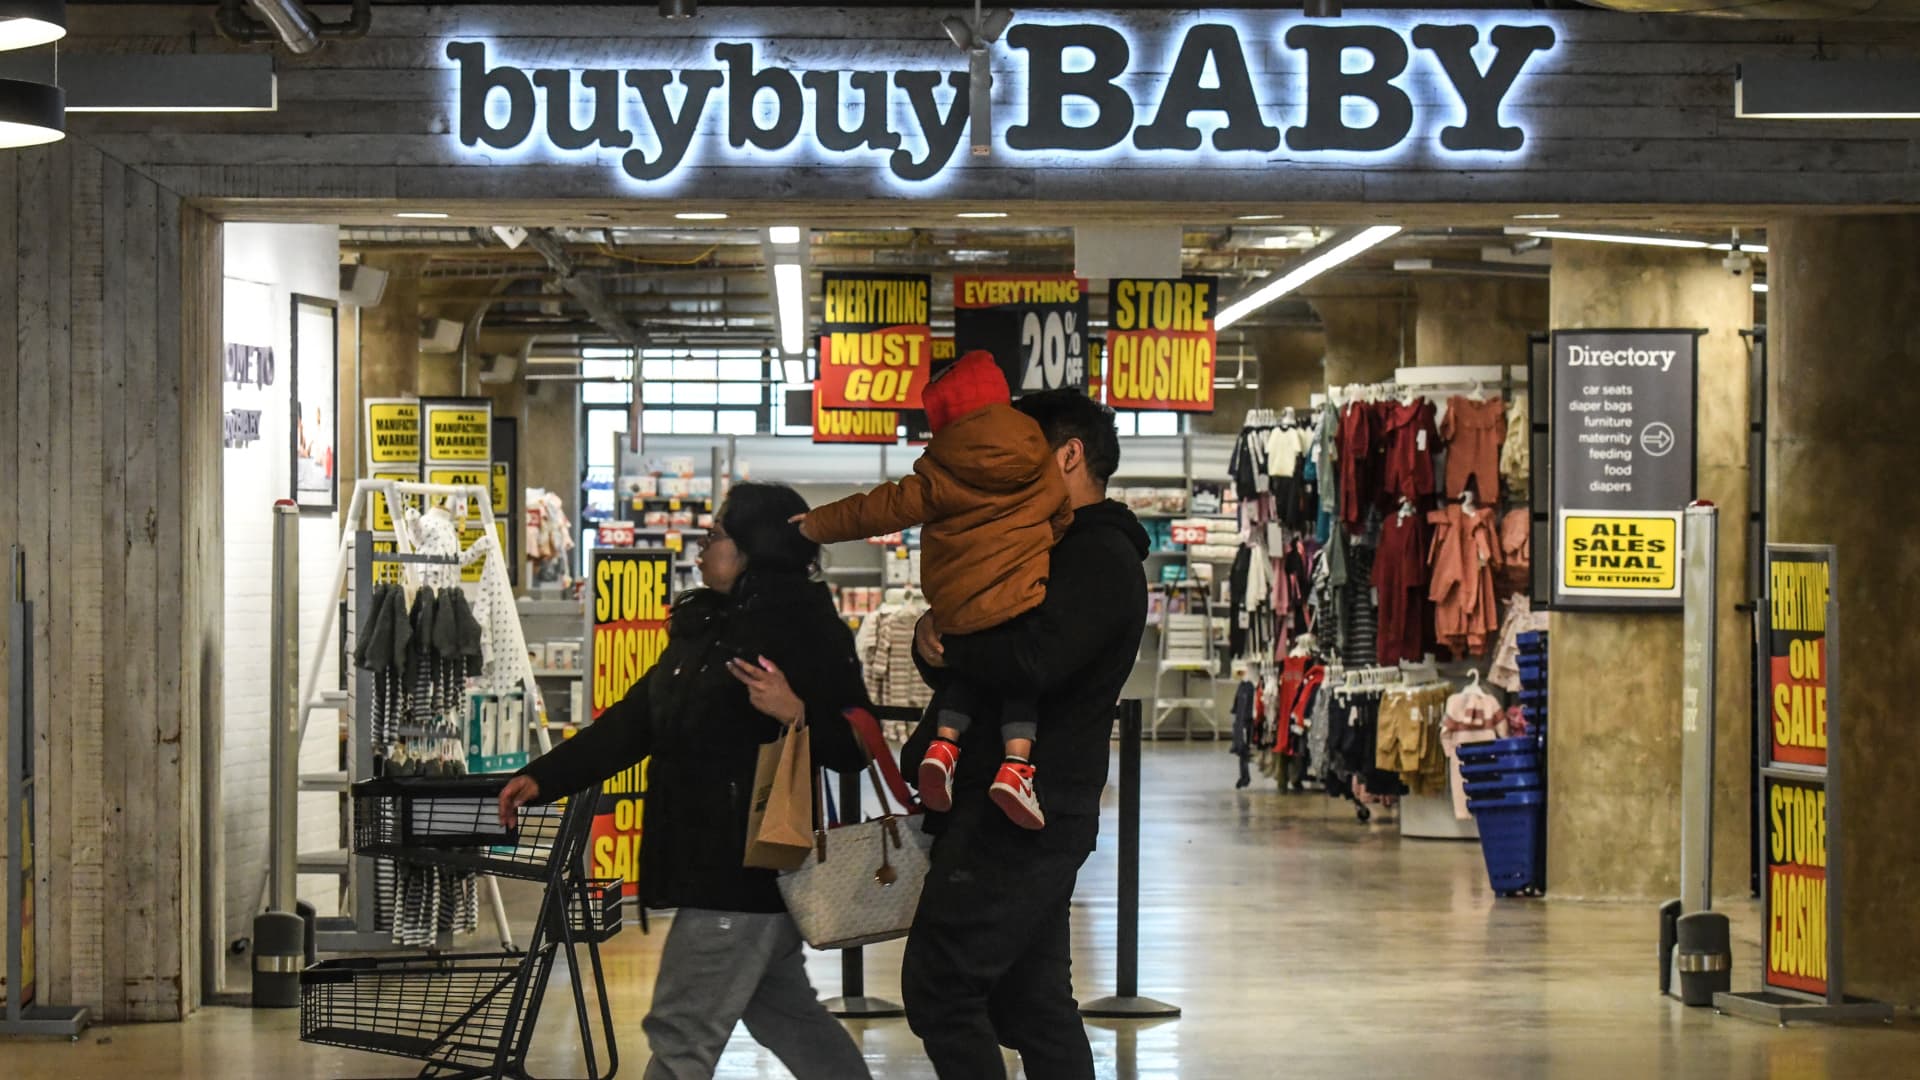 Buy Buy Baby draws sale interest amid Bed Bath & Beyond bankruptcy